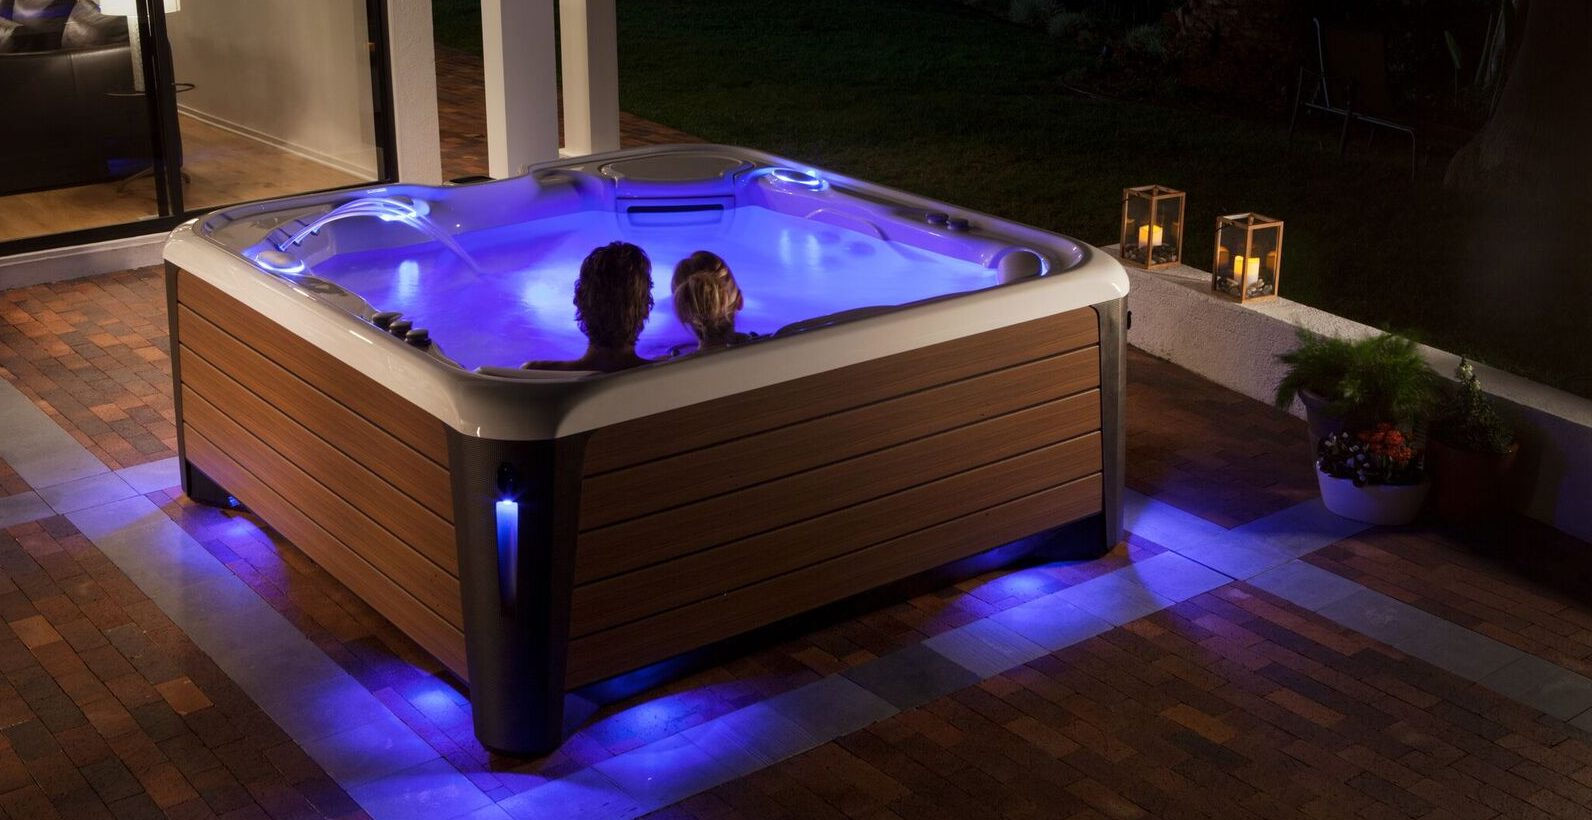 How Deep Is a Hot Tub?